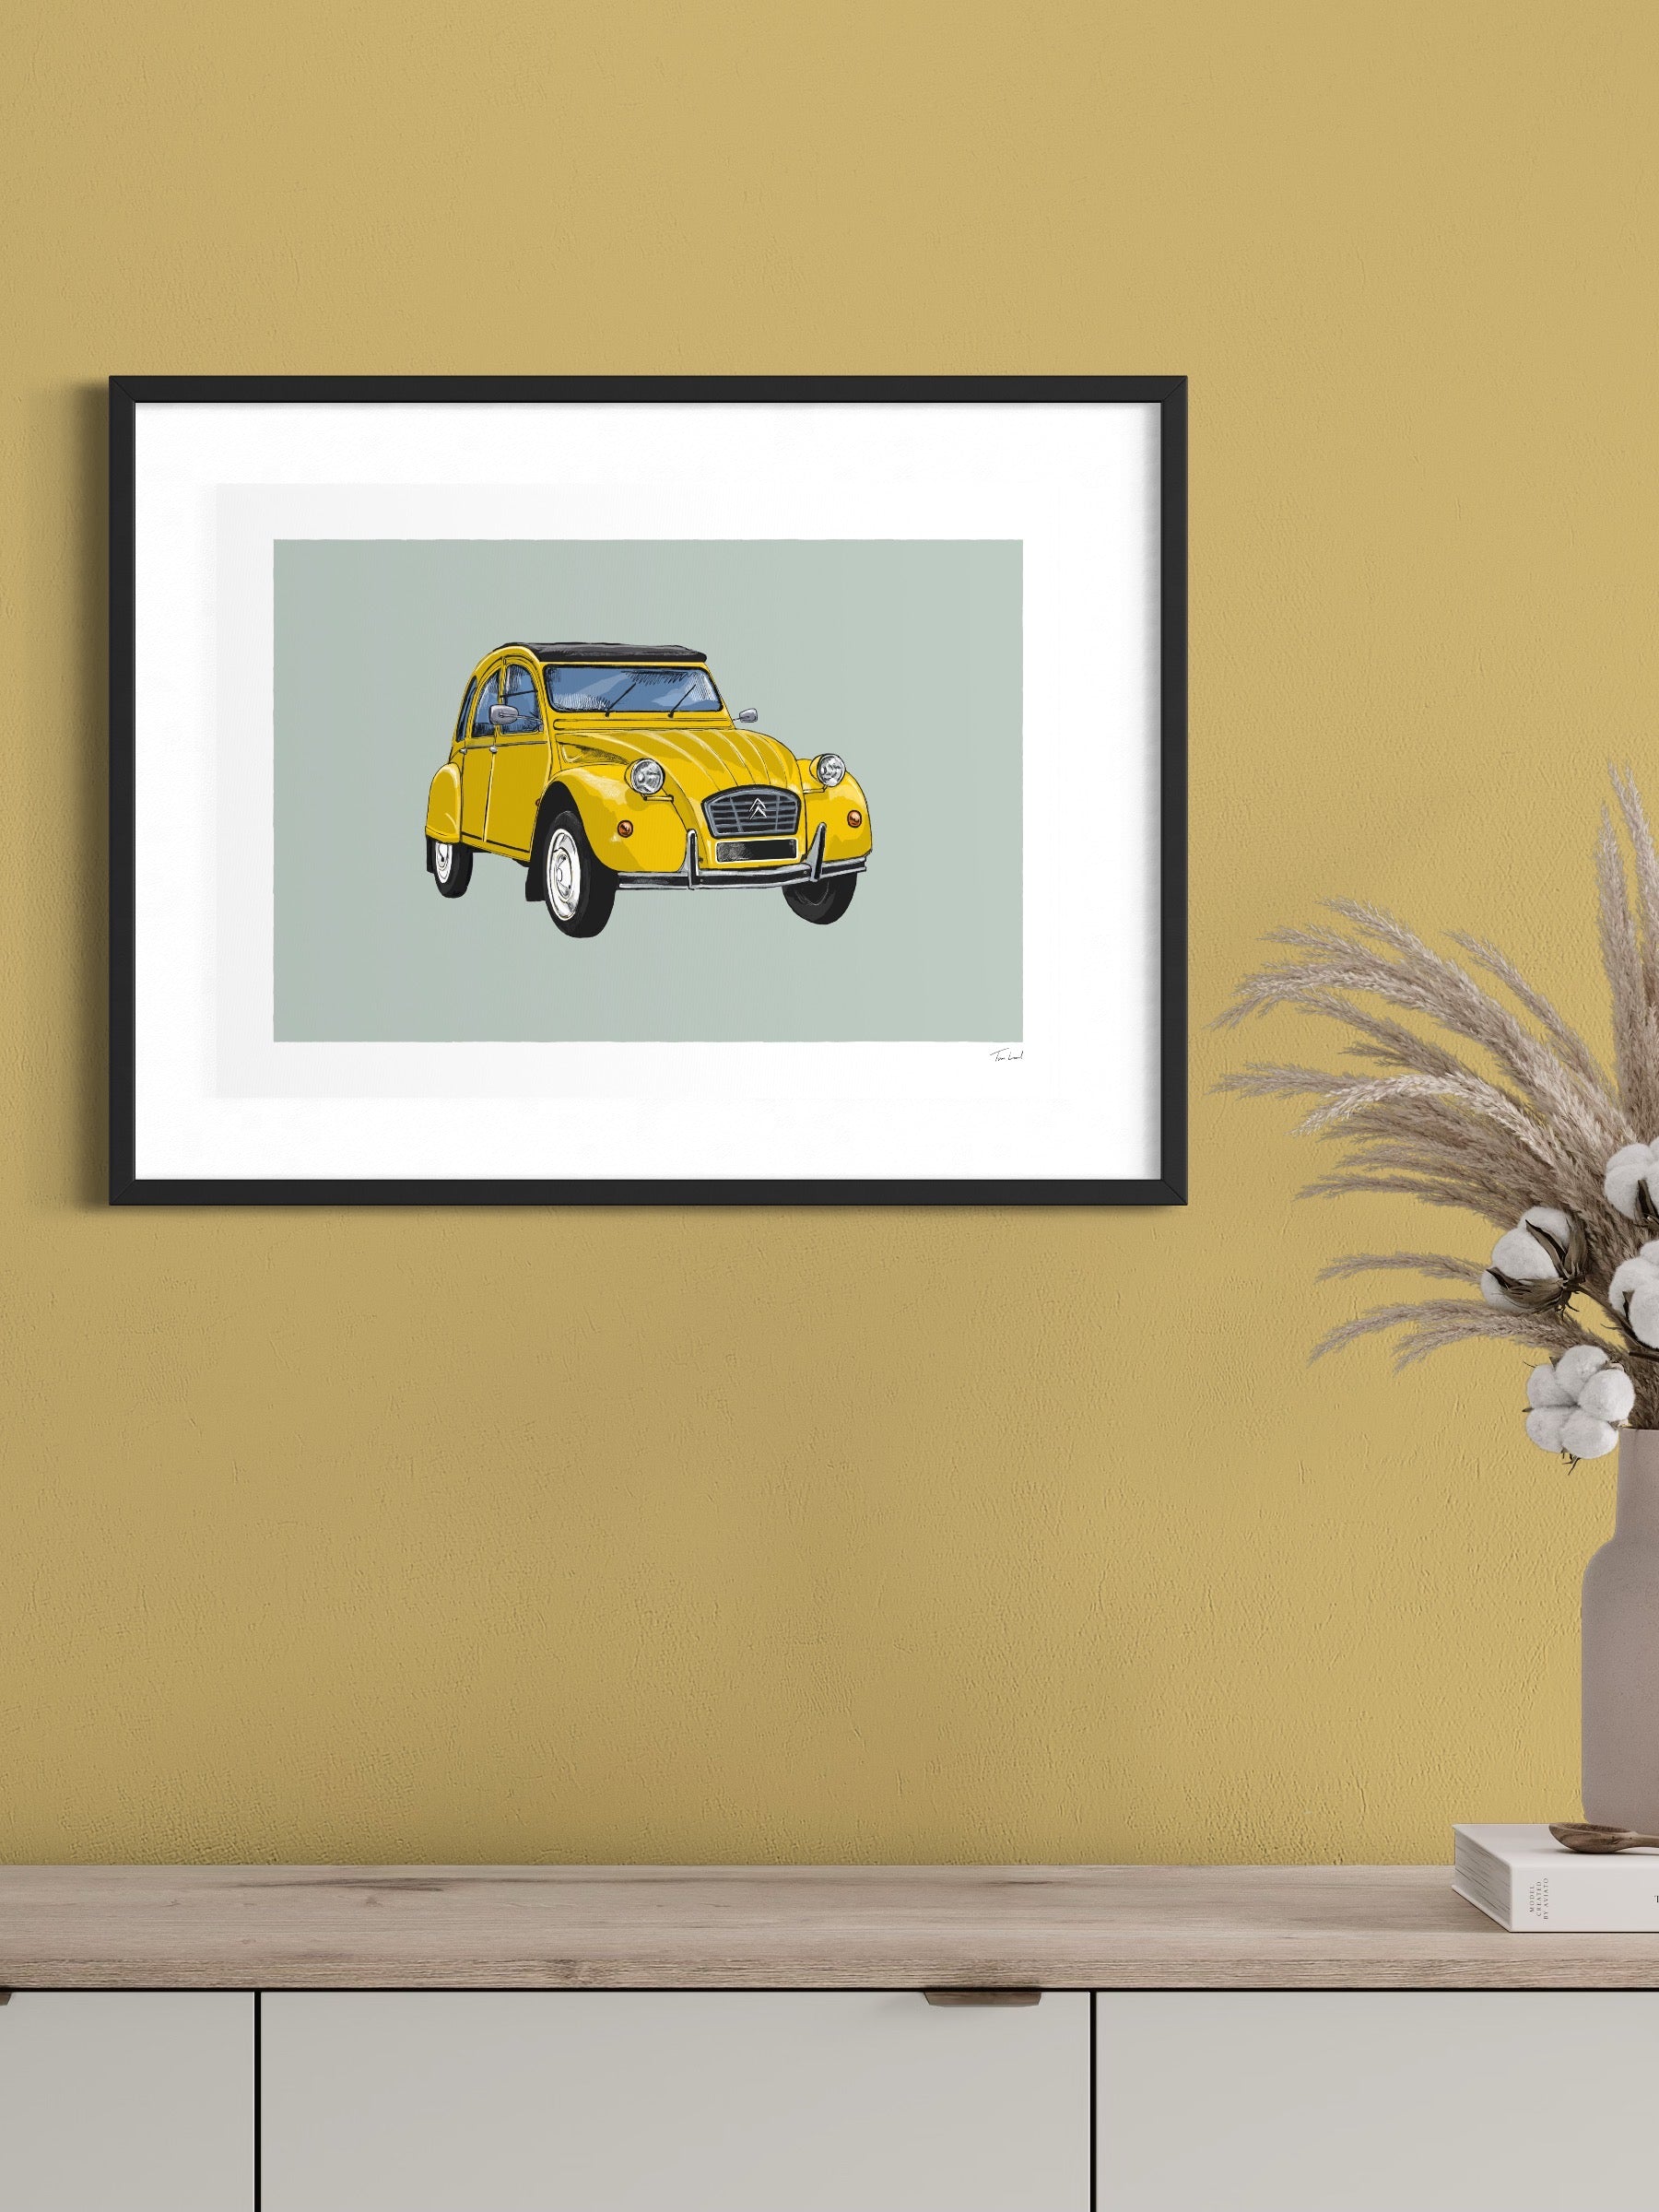 This image shows a giclee wall art print by Tom Laird Illustration of the French classic car, the Citroen 2CV, framed in a beautiful living room with tasteful modern home decor. This art print of a yellow example is available from Tom Laird Illustration in a variety of sizes.